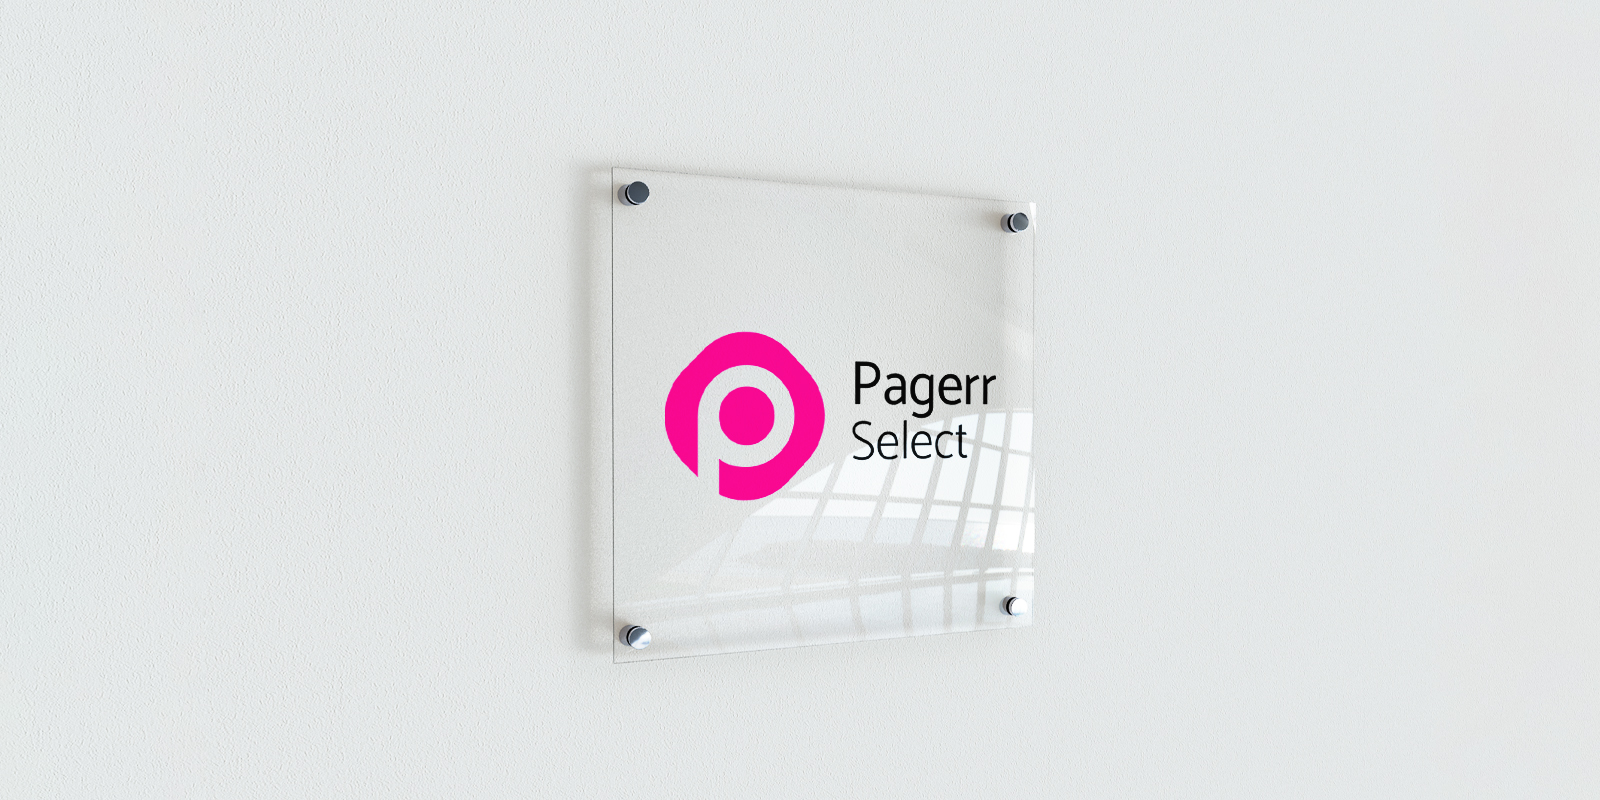 Acrylic signs in Seville - Print with Pagerr